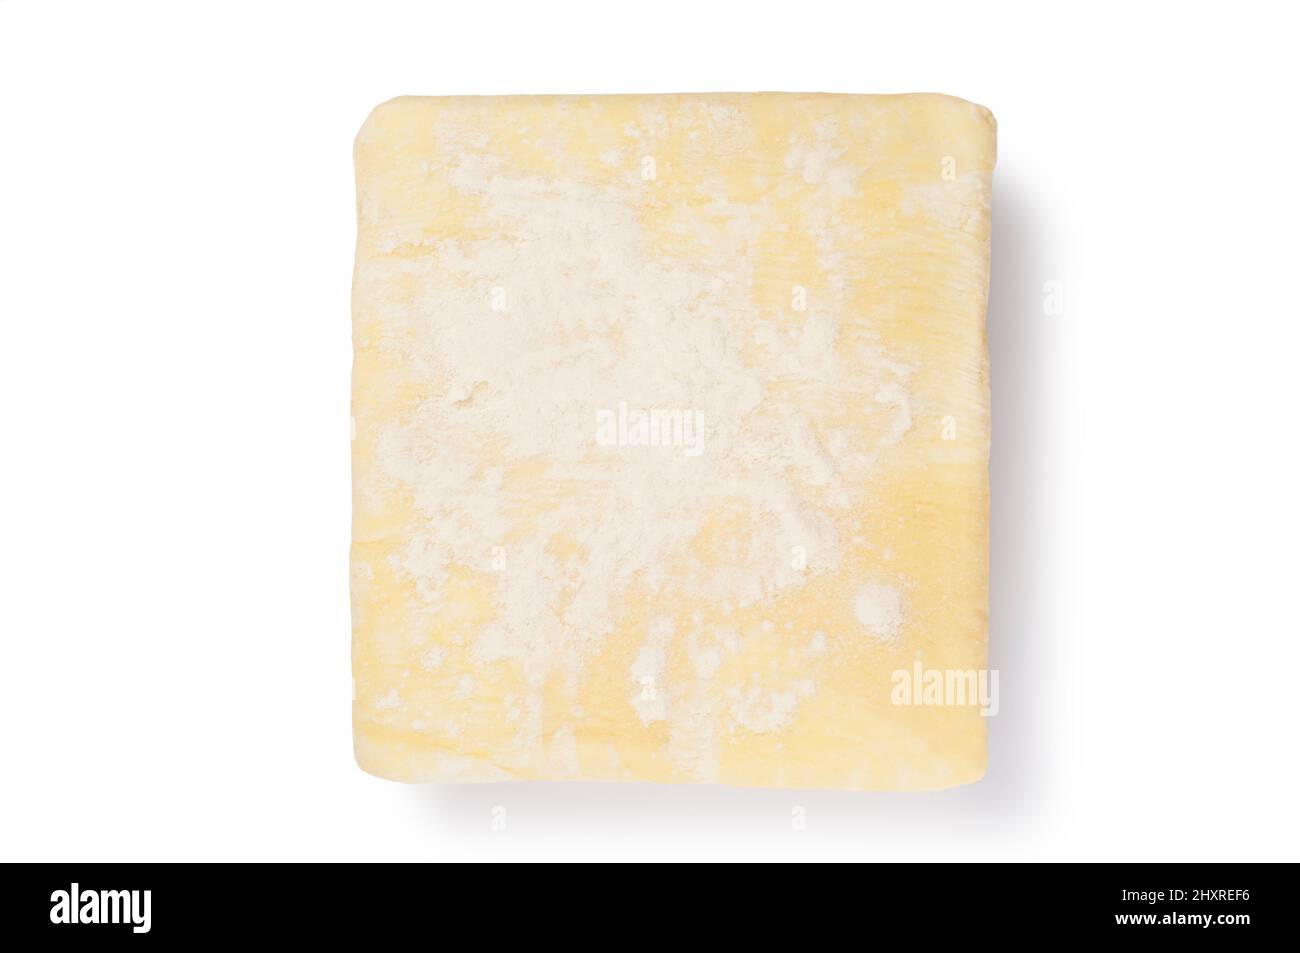 Studio shot of a block of uncooked puff pastry cut out against a white background - John Gollop Stock Photo